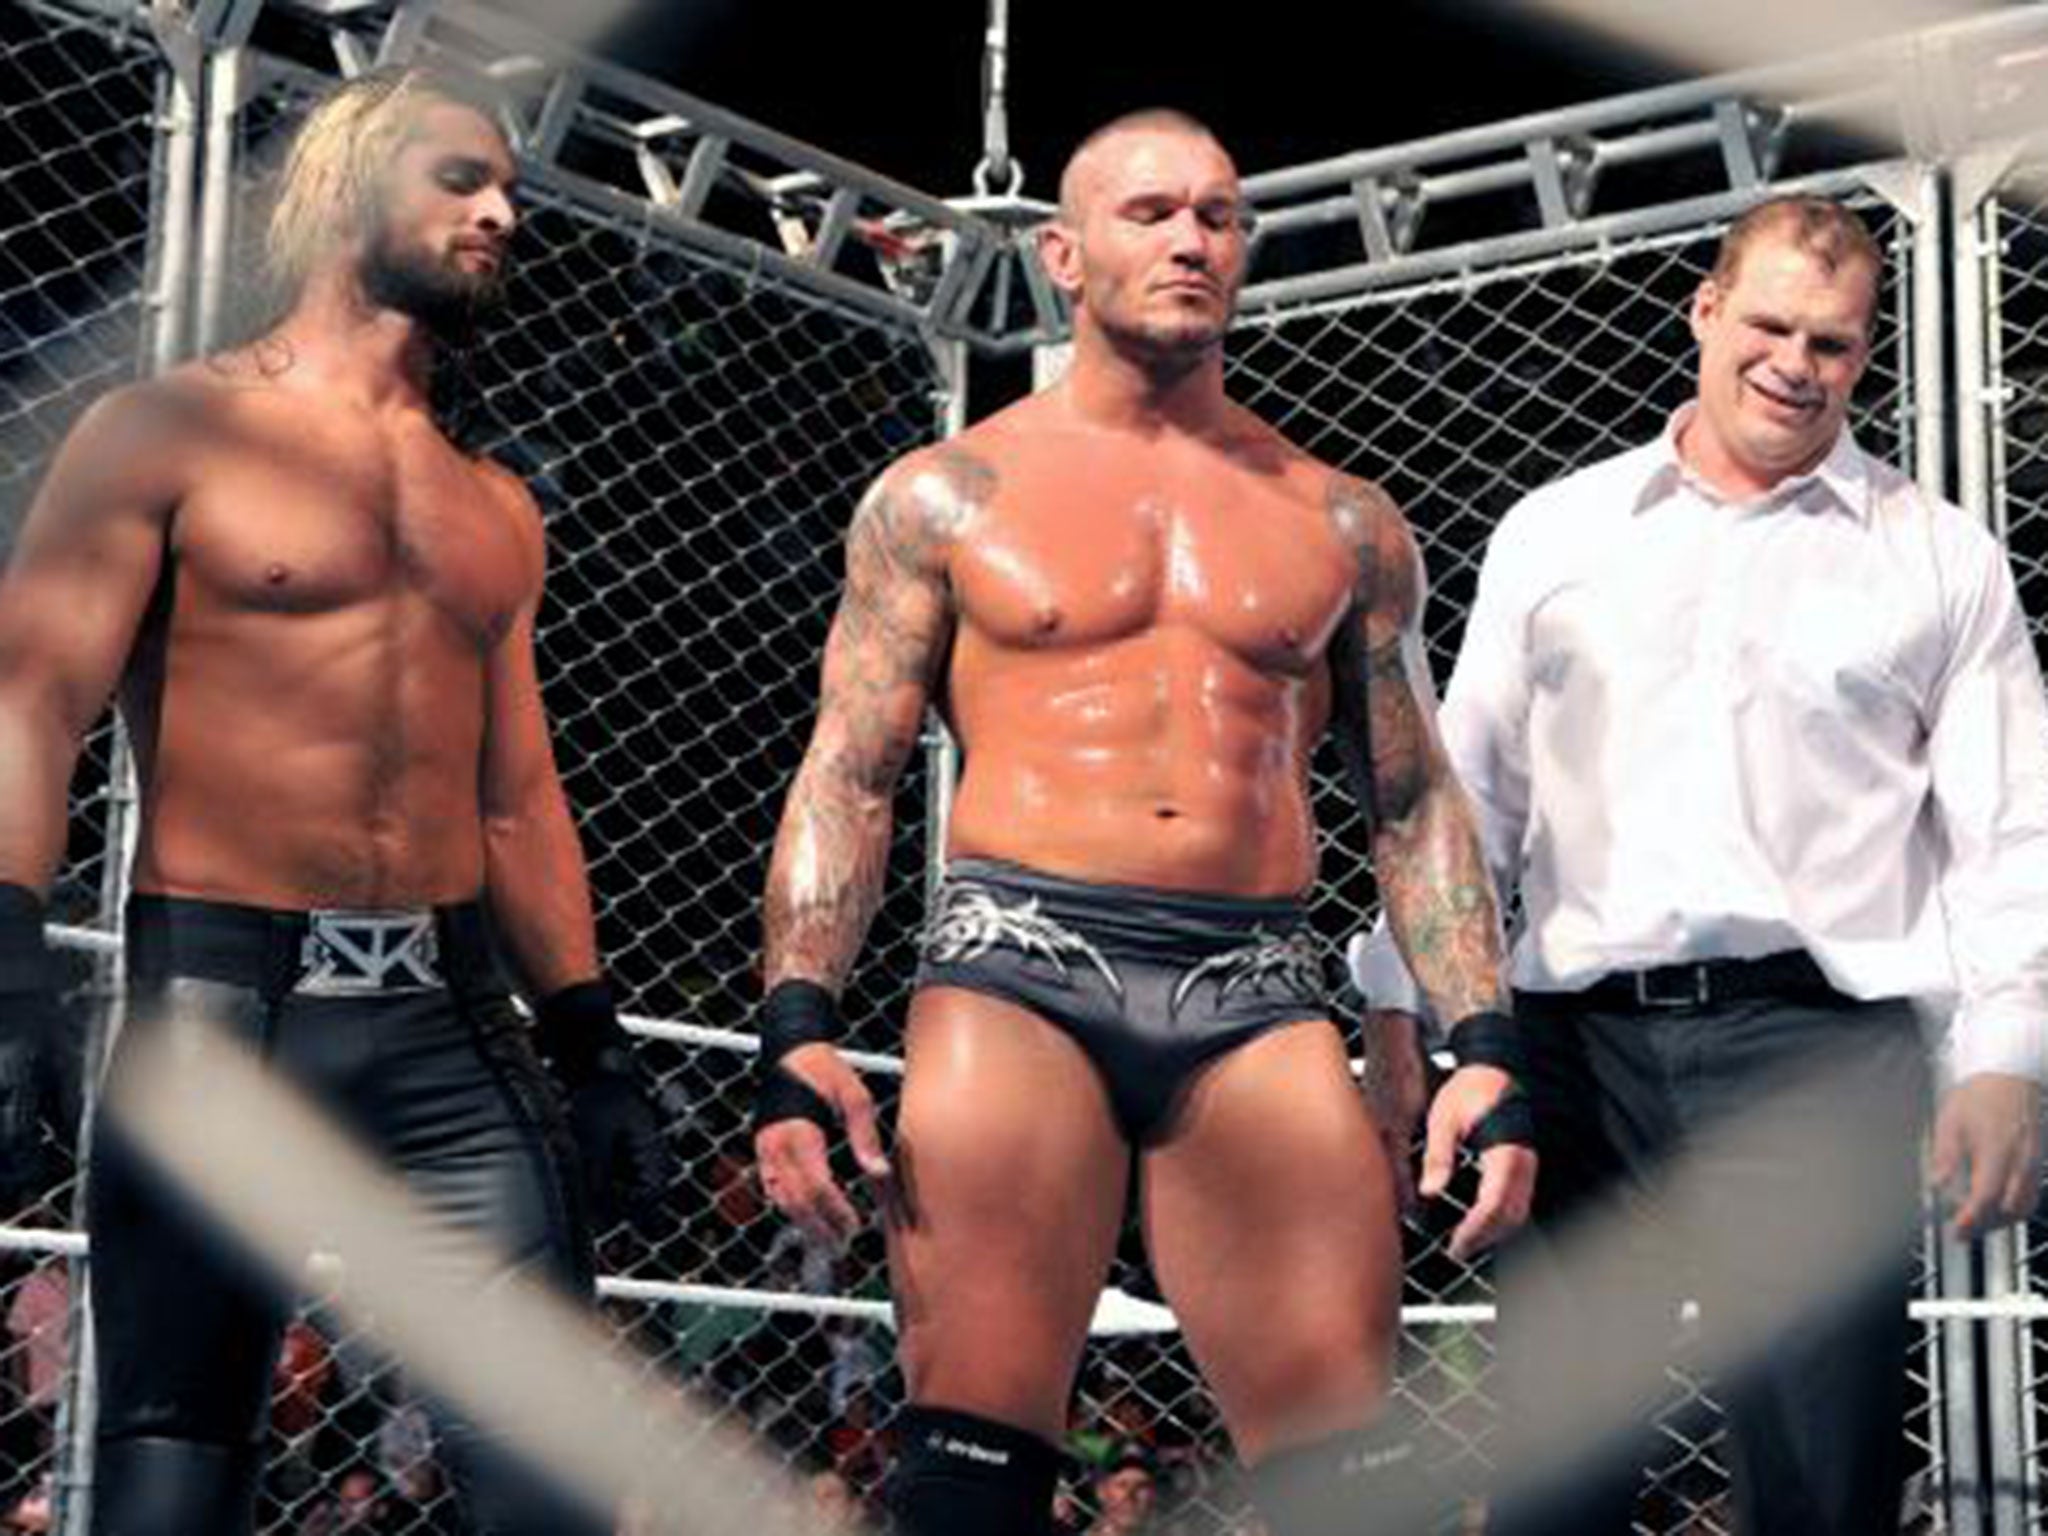 Seth Rollins, Randy Orton and Kane stand tall over Roman Reigns